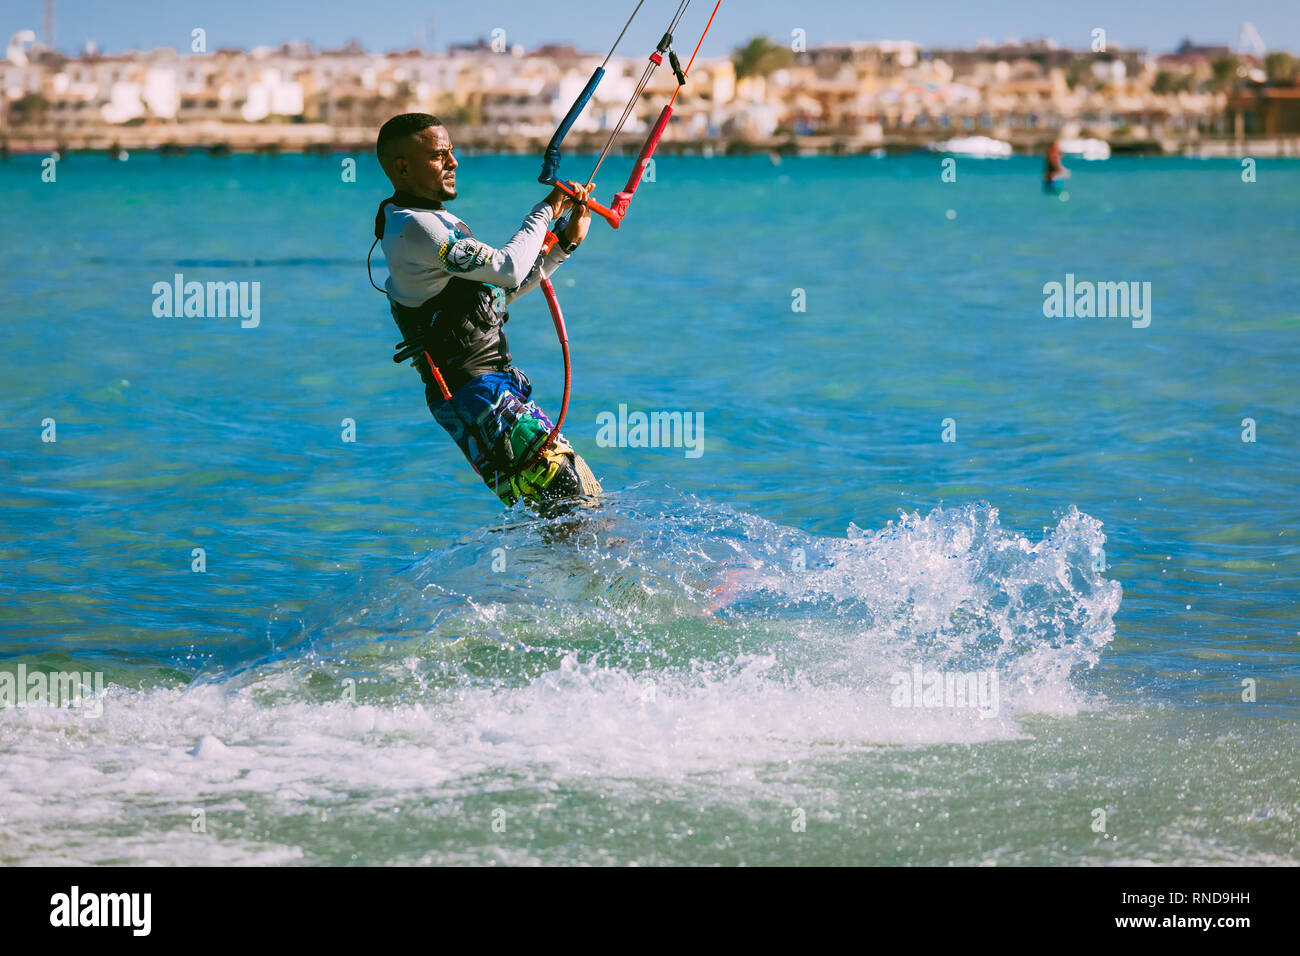 Egypt, Hurghada - 30 November, 2017:The kitesurfer gliding on the Red sea waves. The outdoor water sport activity. Popular tourist attraction. The Pan Stock Photo